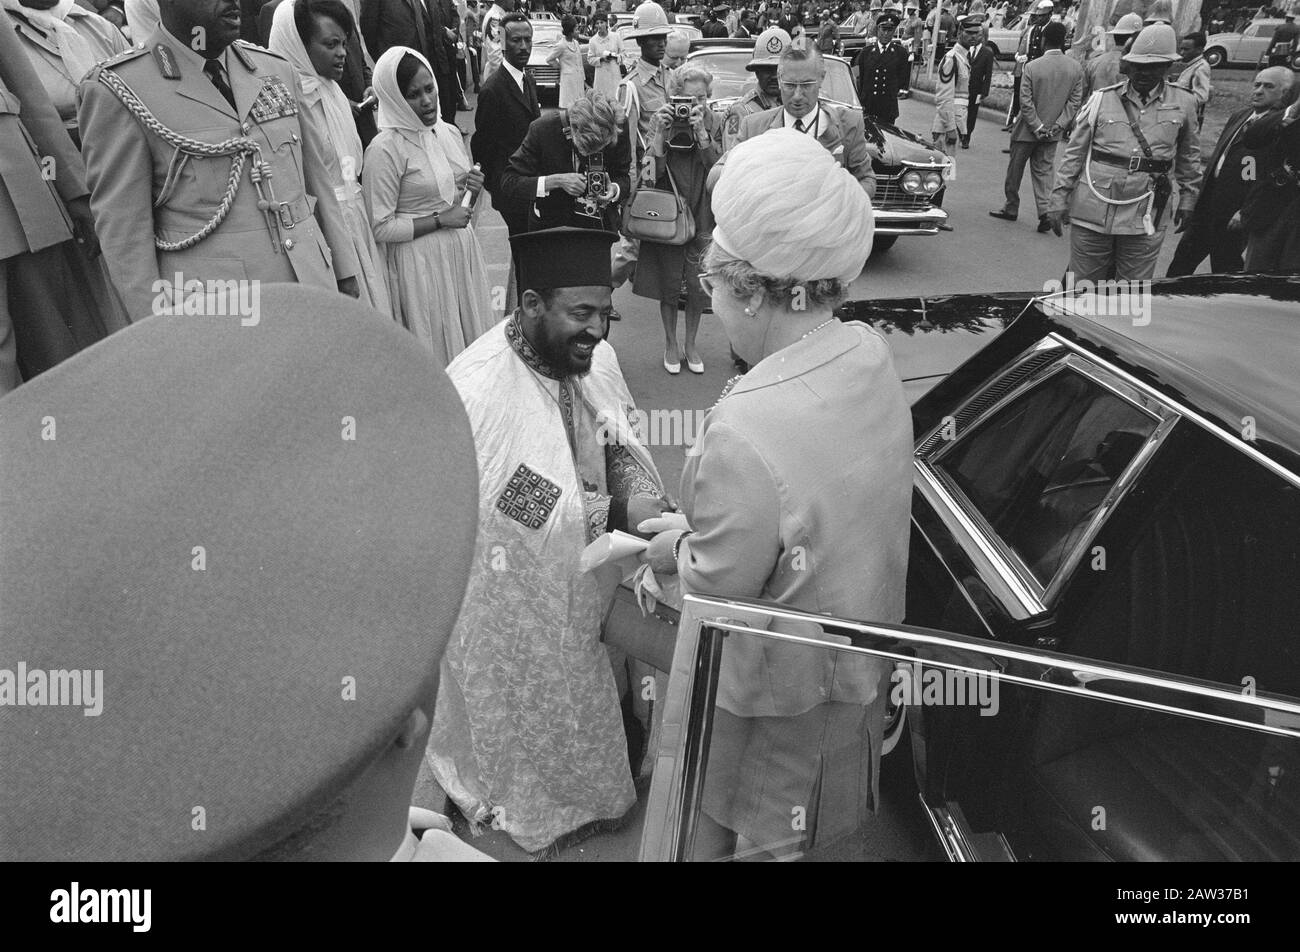 Royal Family visits Holy Trinity Cathedral in Addis Ababa No. 18, 19, 20:. Queen Juliana says goodbye patriarch Aba Habe Tema Rian, 21:. $ Date: January 28, 1969 Location: Addis Ababa, Ethiopia Keywords: GOODBYE, families, queens Person Name: Aba Habe Tema Rian, Juliana (queen Netherlands) Stock Photo